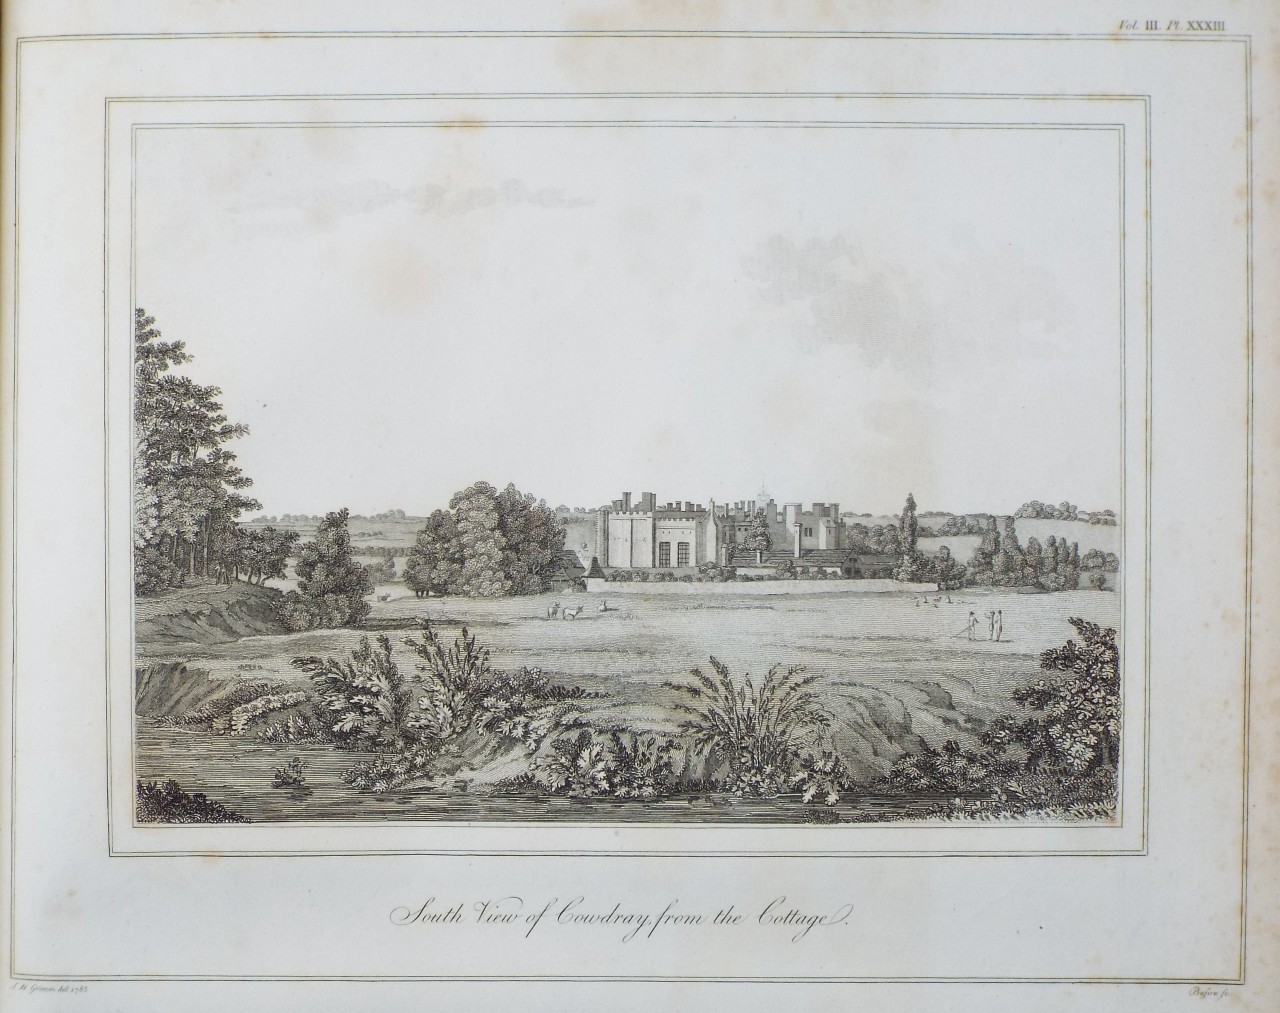 Print - South View of Cowdray, from the Cottage. - Basire